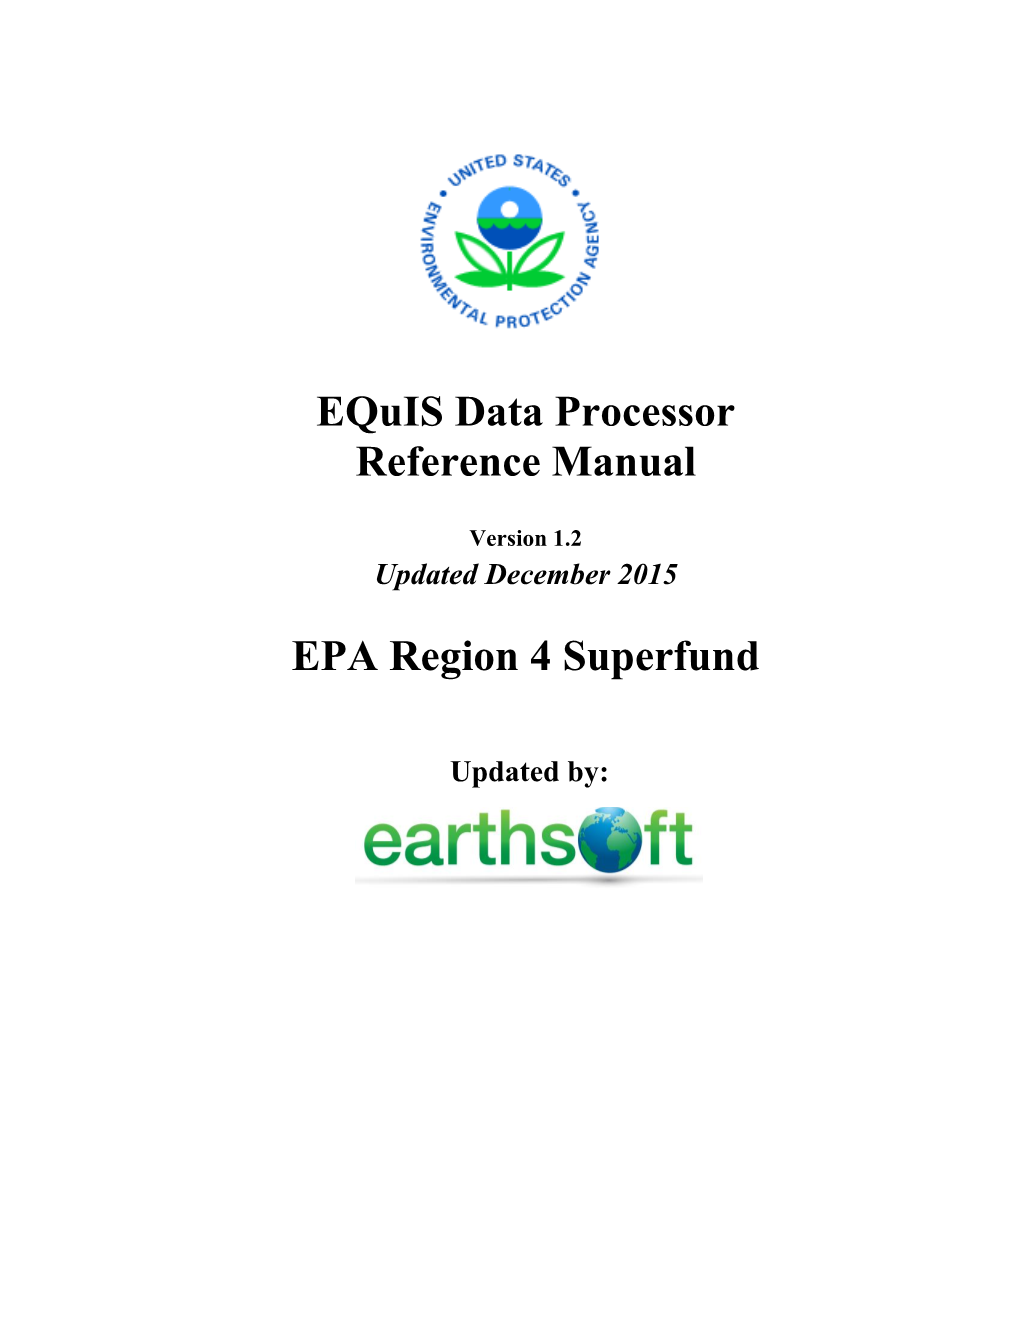 Equis Data Processor Reference Manual